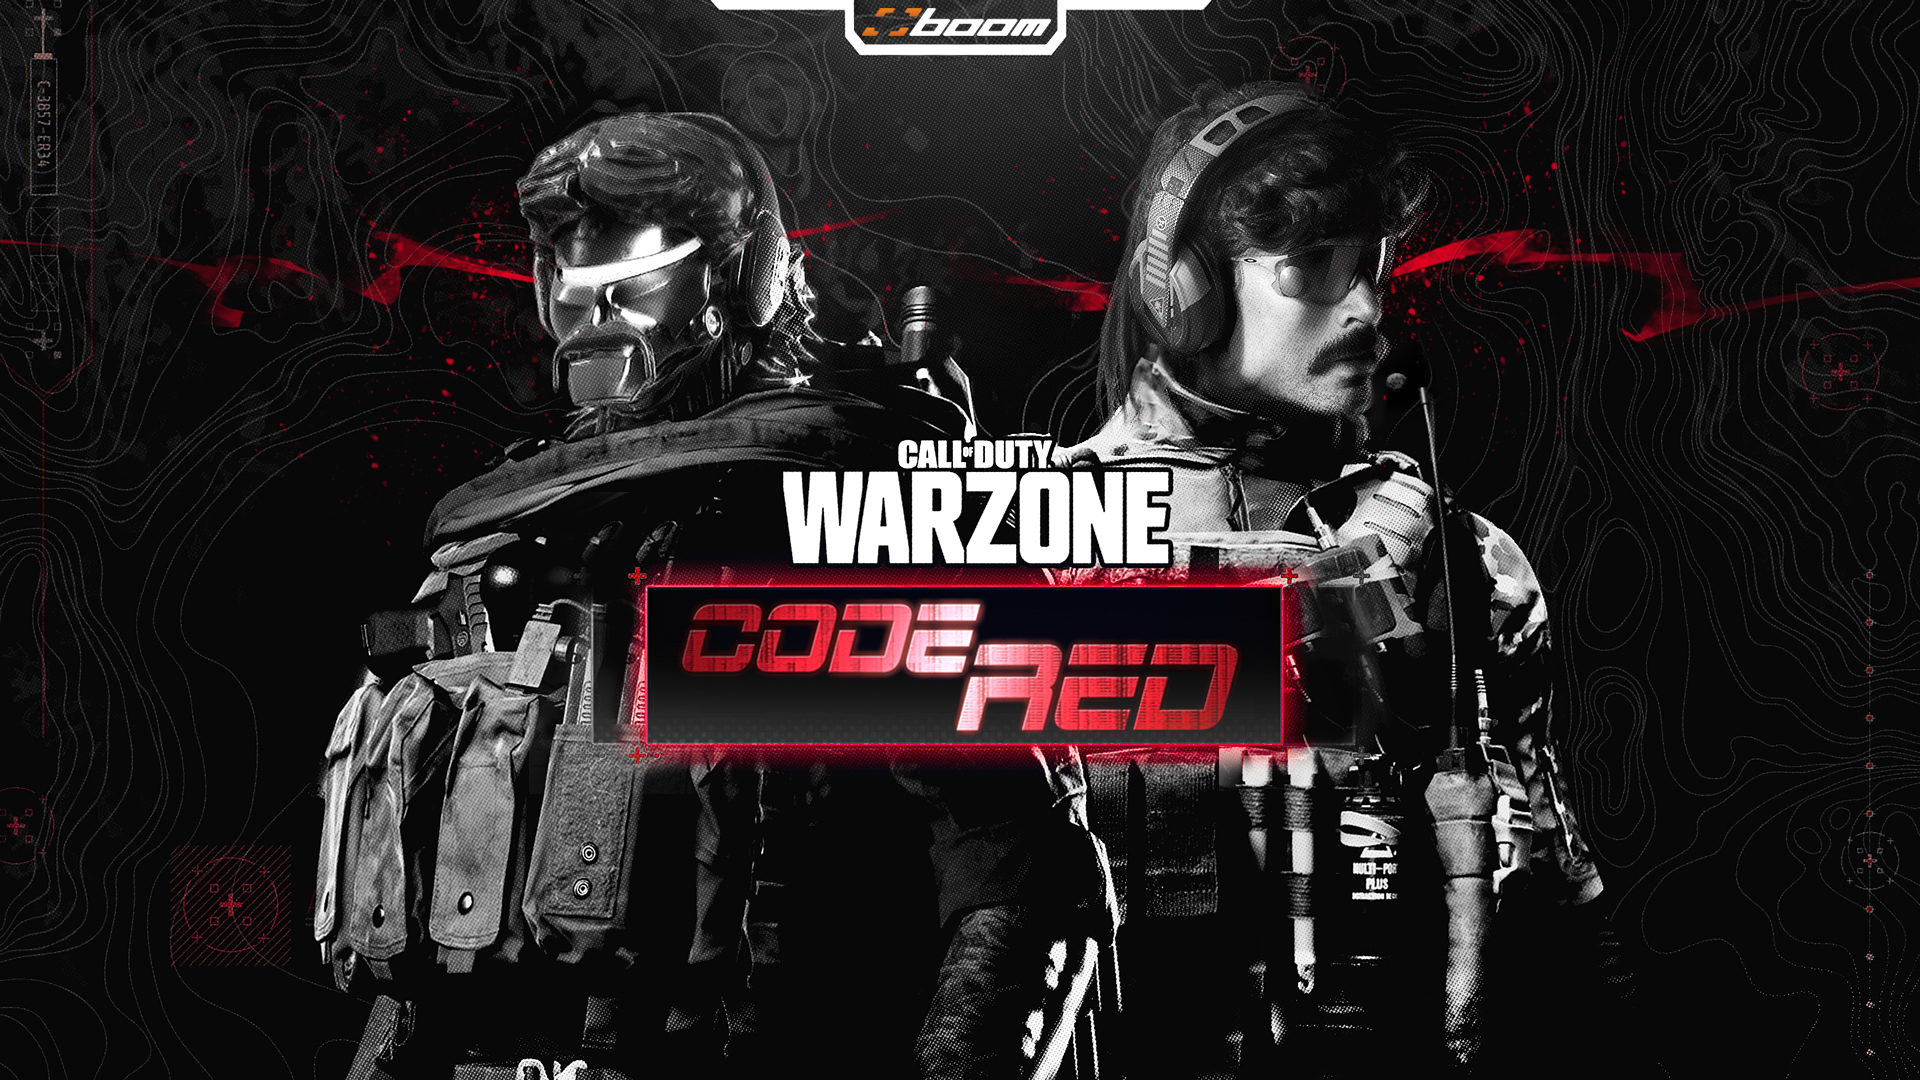 sammenbrud Håndfuld At interagere Dr Disrespect on Twitter: "$20,000 Code Red Warzone Charity Tournament w/  @FormaL at 1pm PT. Sweatiest bracket I've ever seen... I wanna remind em.  https://t.co/bHsMu8hnlN https://t.co/Q0H2ZbsZjy" / Twitter